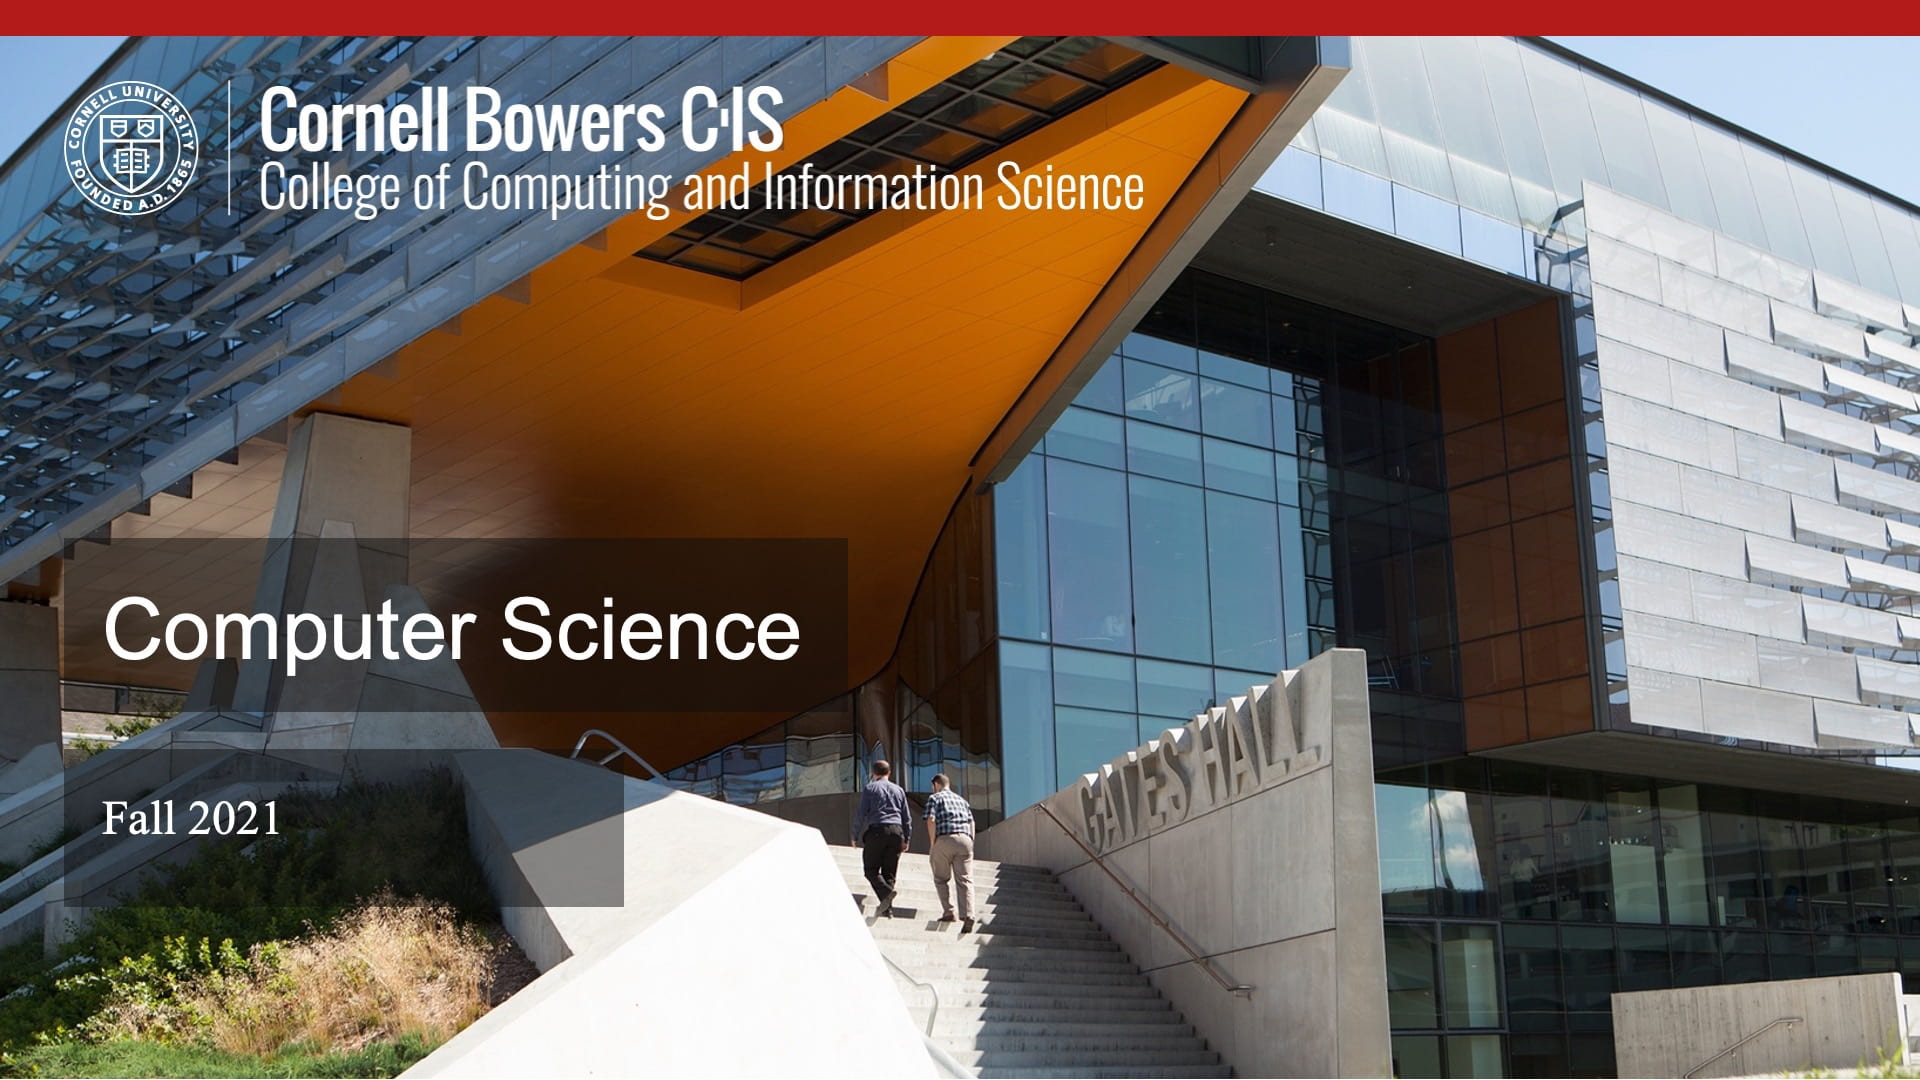 Powerpoint image slide with Gates Hall